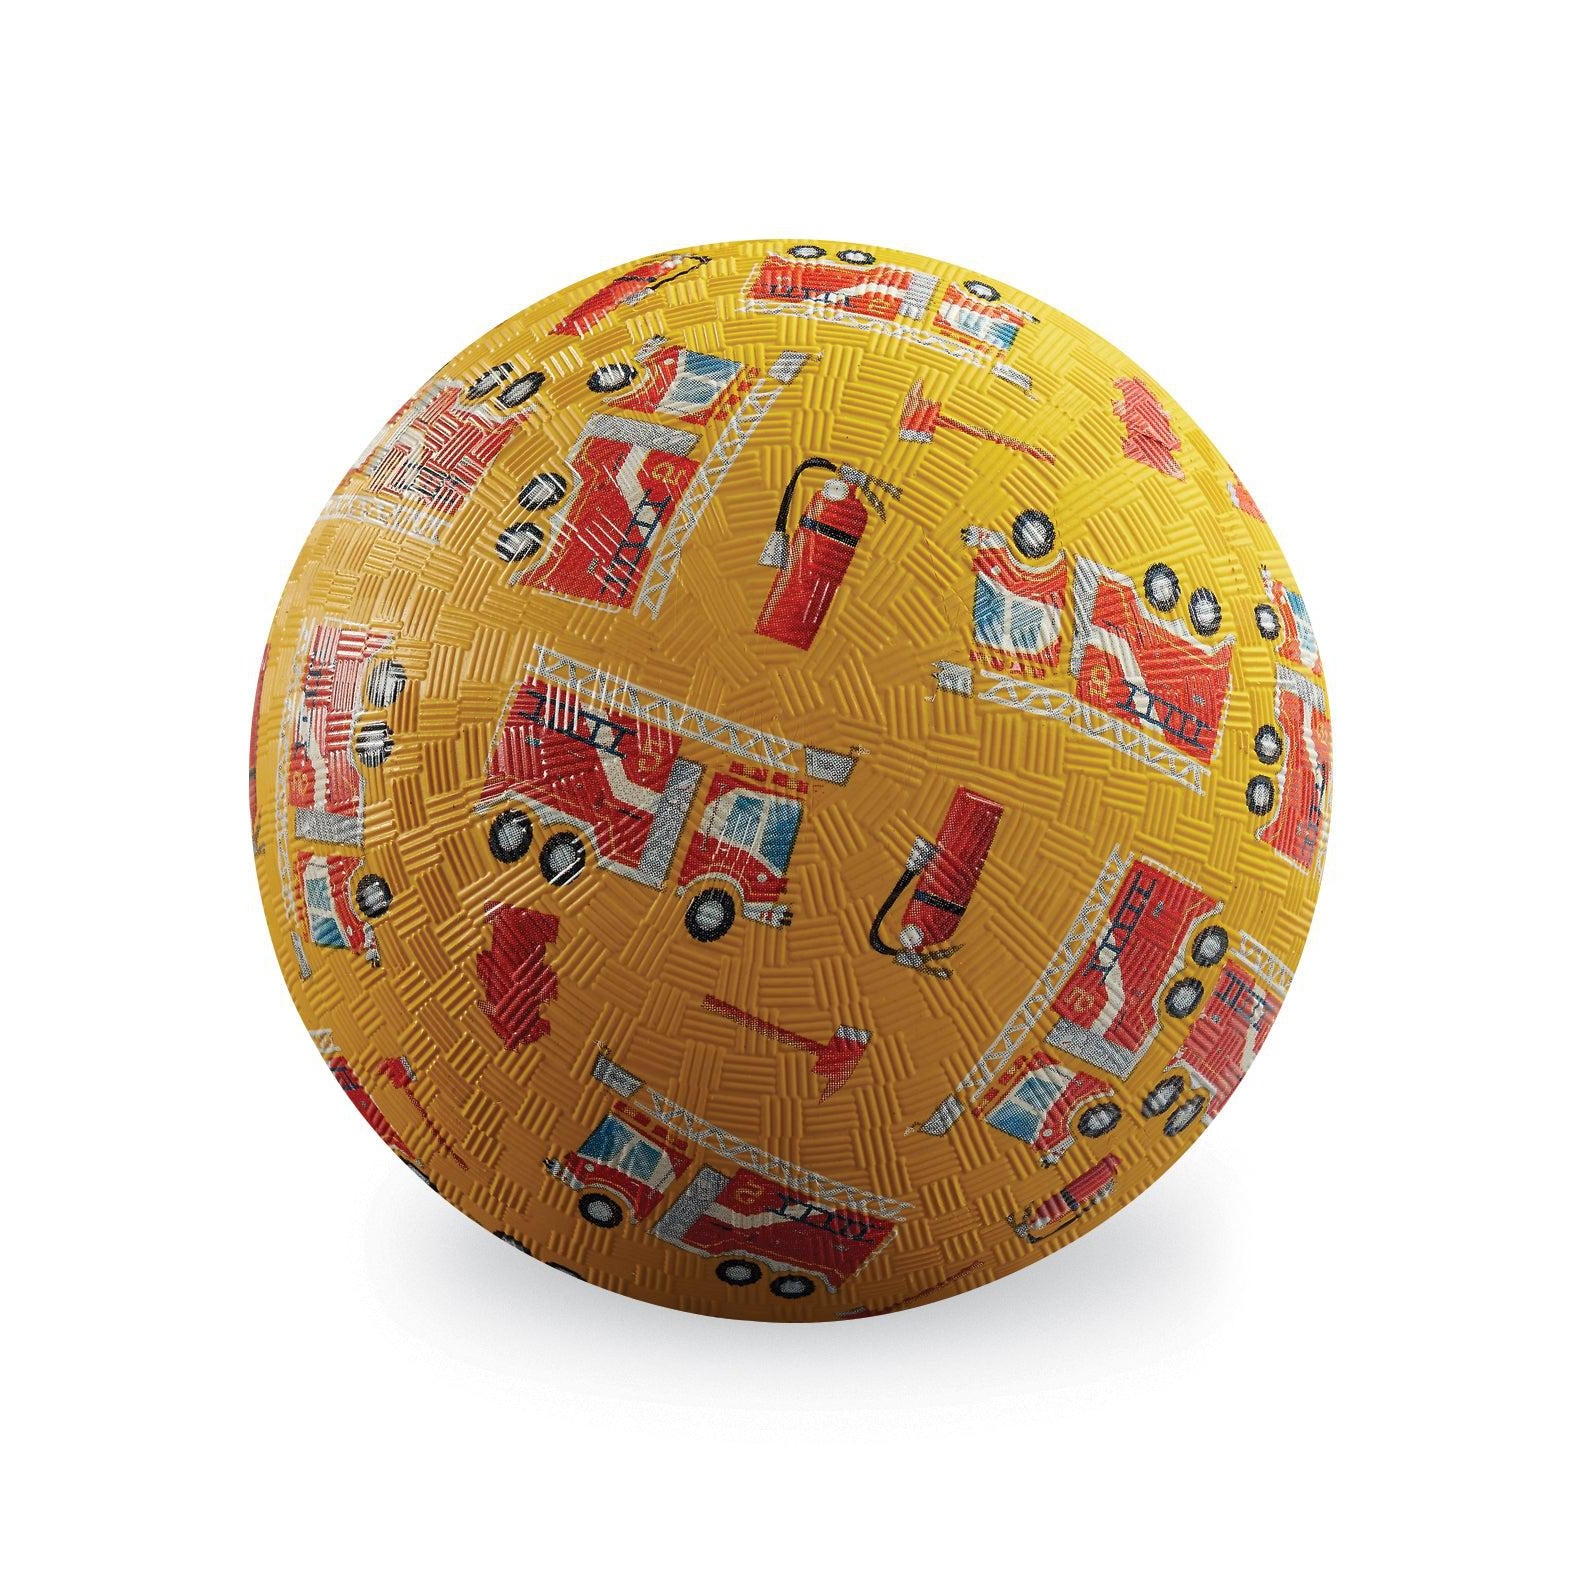 Seven inch golden yellow ball with a bright friendly pattern of red fire trucks, axes, fire hydrants, and fire extinguishers.